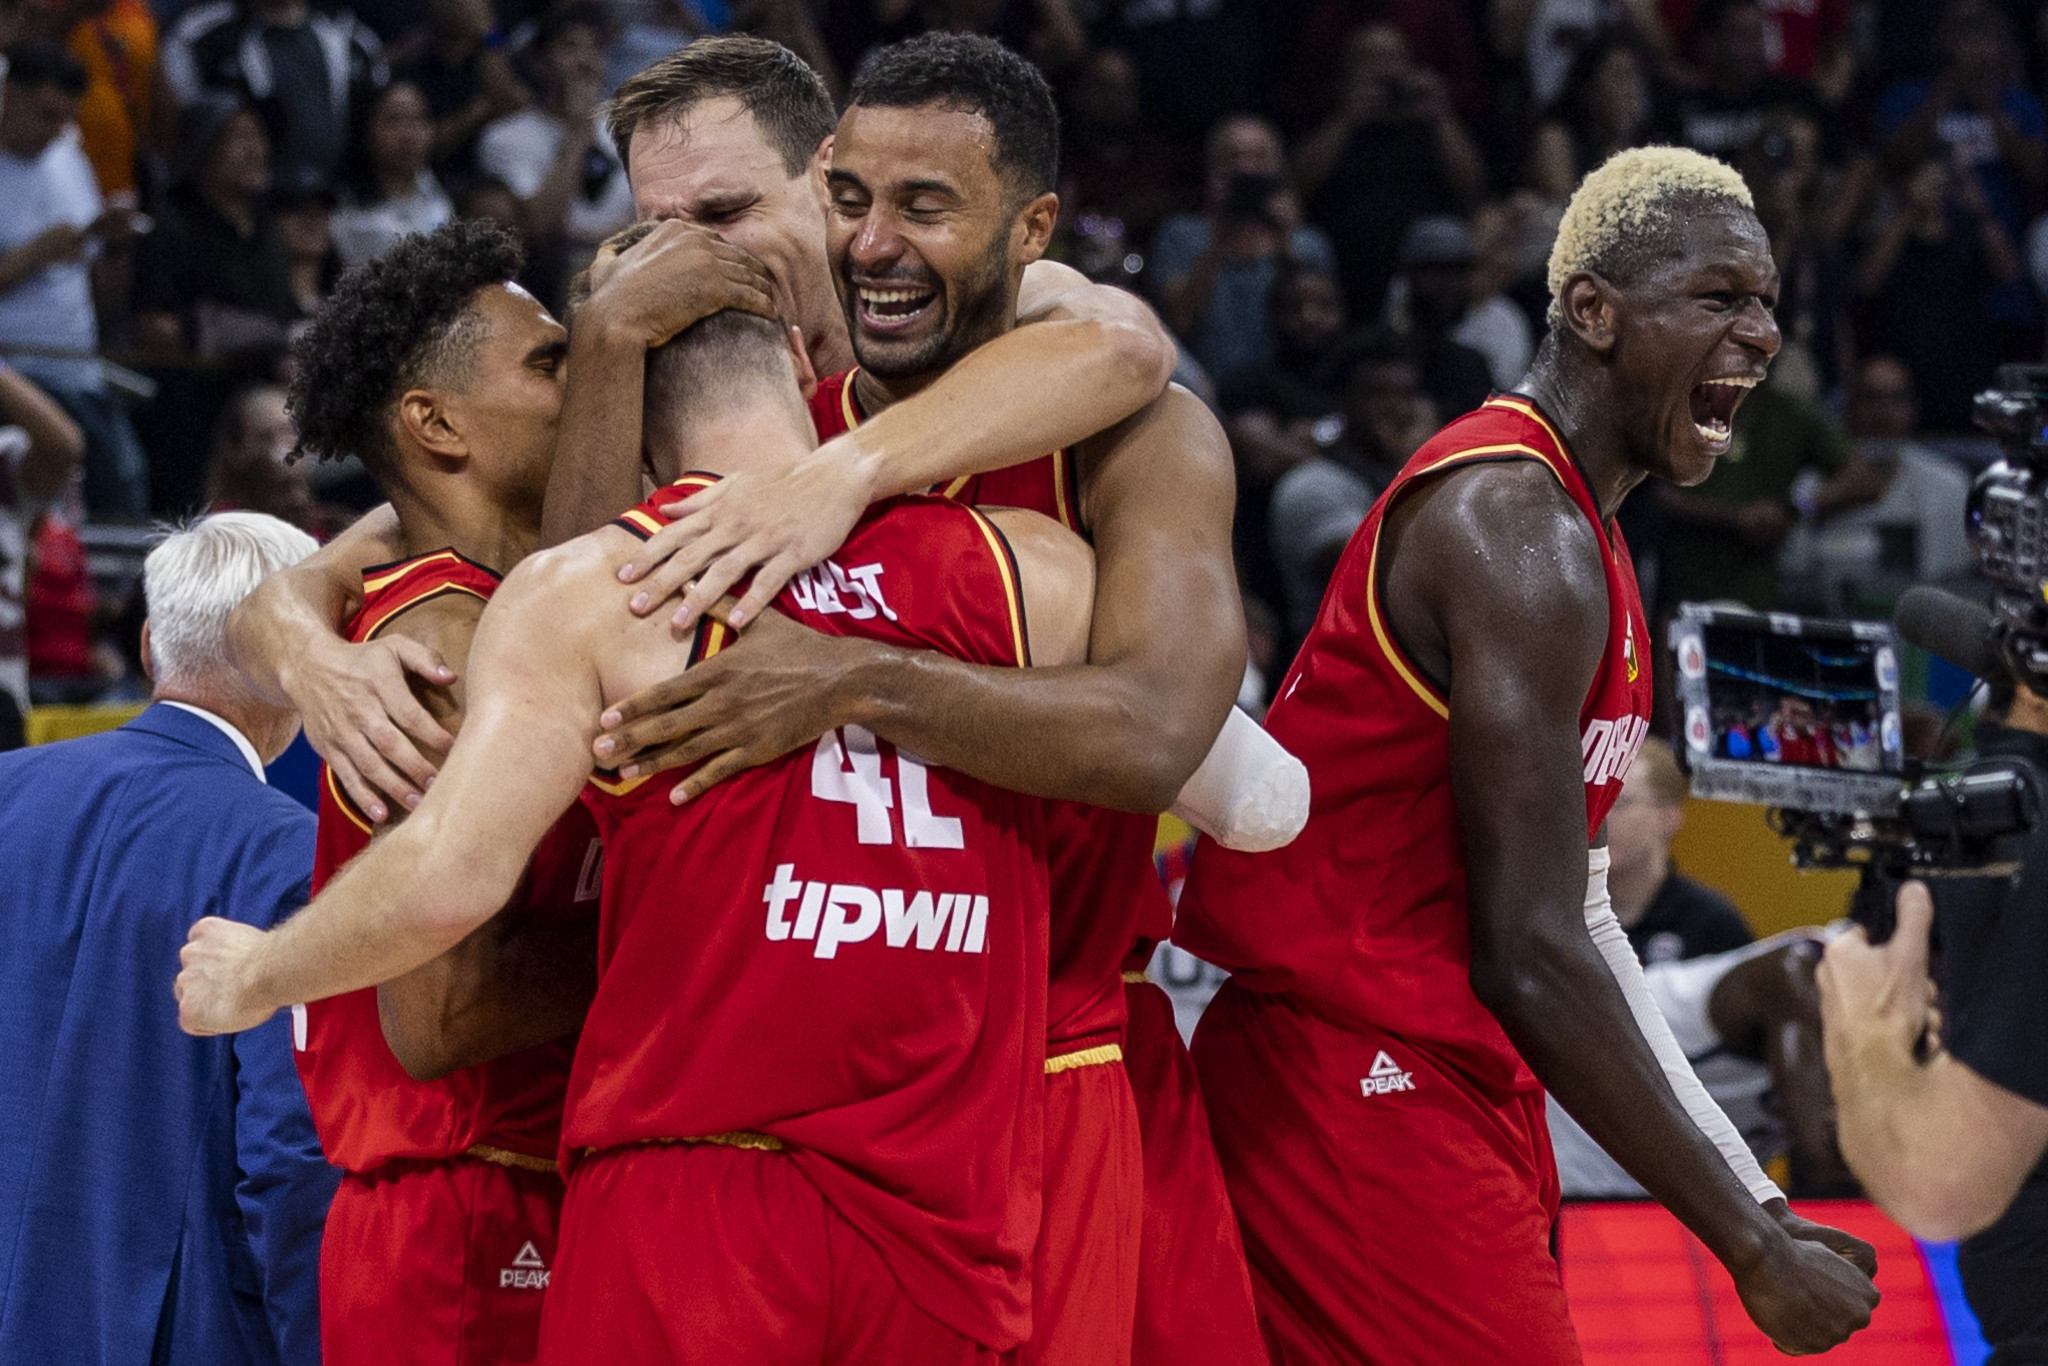 Germany shock US in 224-point thriller to make FIBA World Cup final